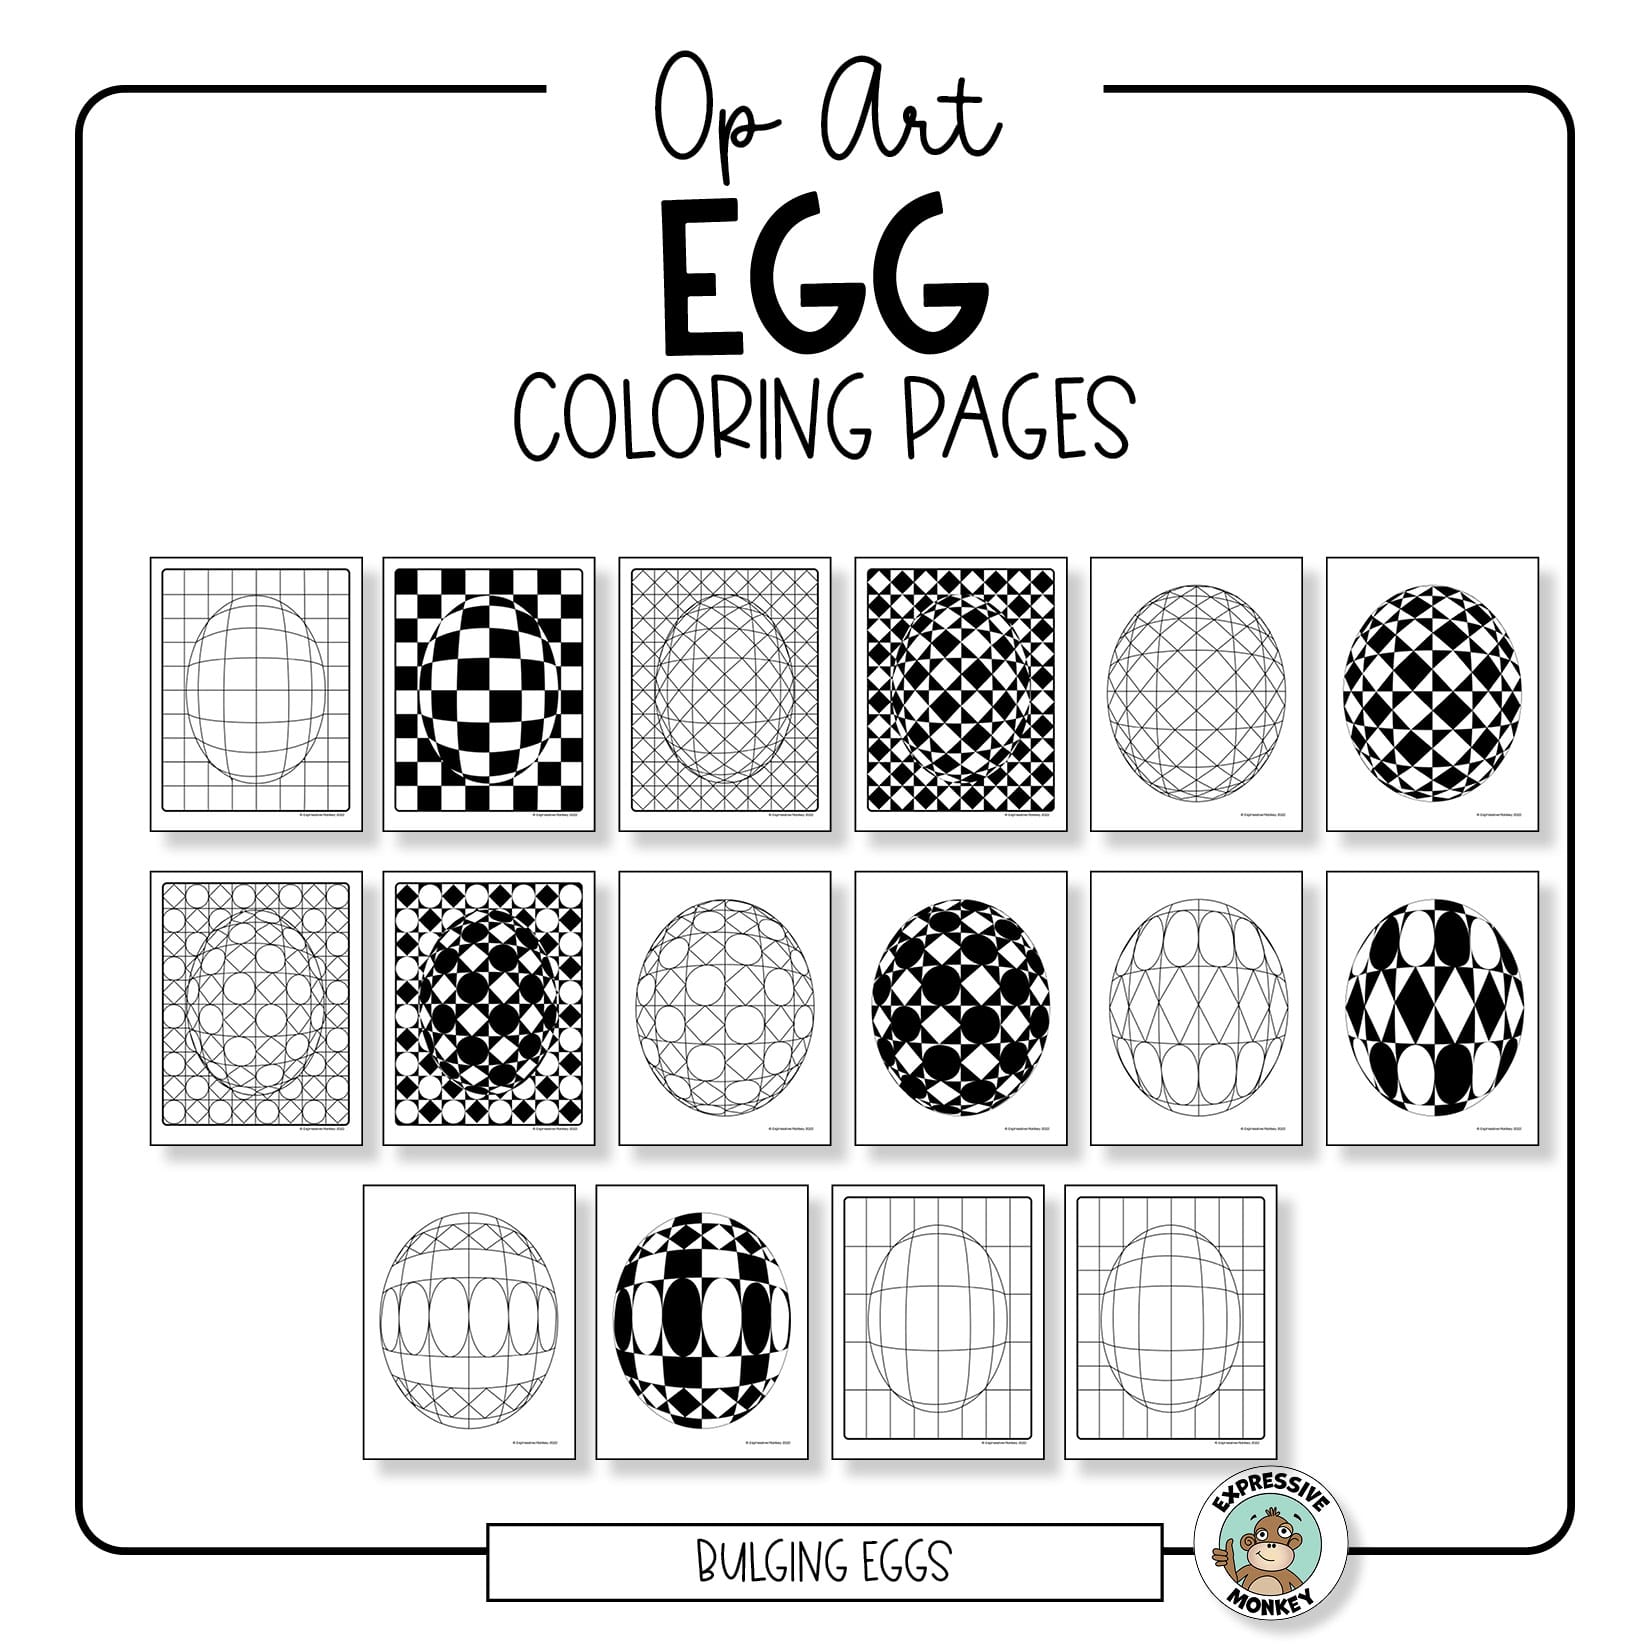 Op art egg coloring pages